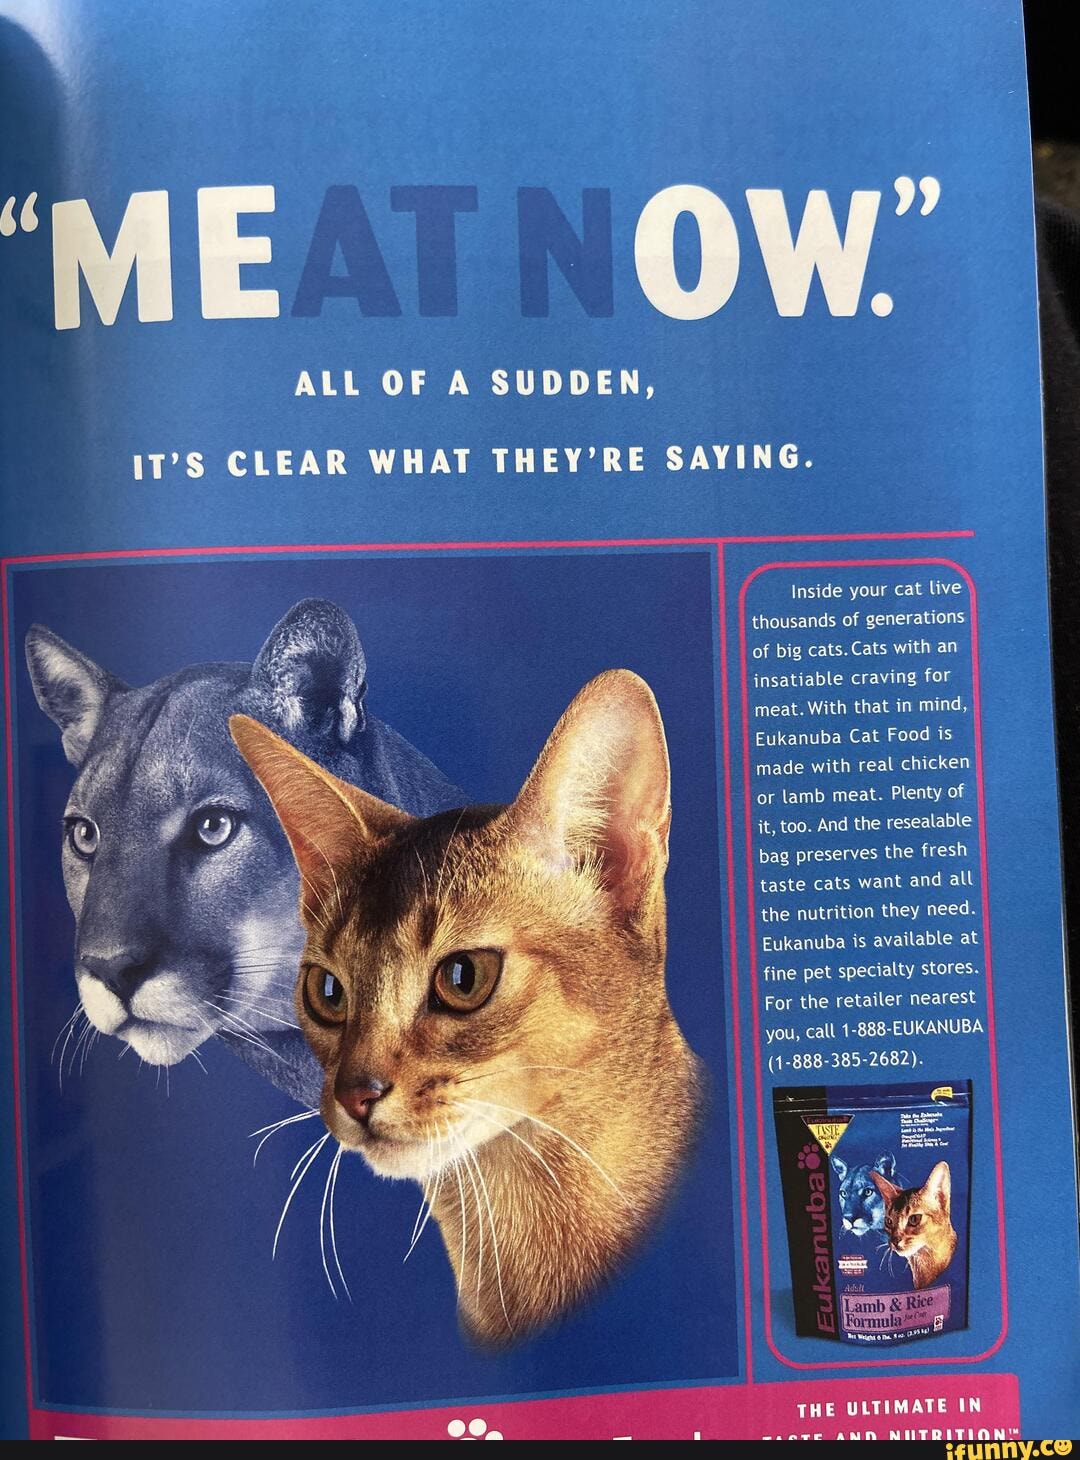 IT'S CLEAR WHAT THEY'RE SAYING. Inside your cat live thousands of